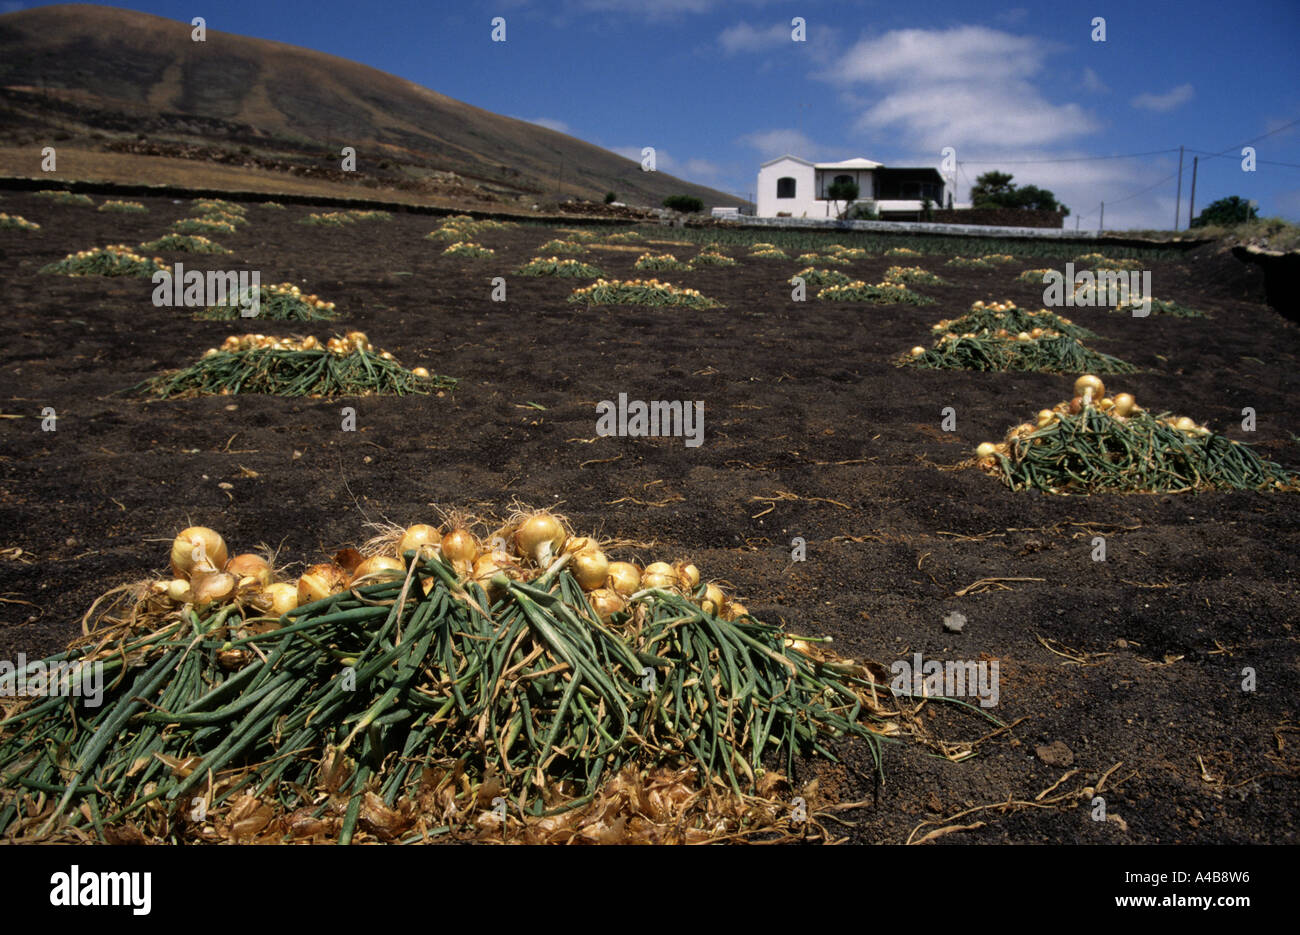 Onion crop drying in the sun Lanzarote Canary Islands Spain Stock Photo